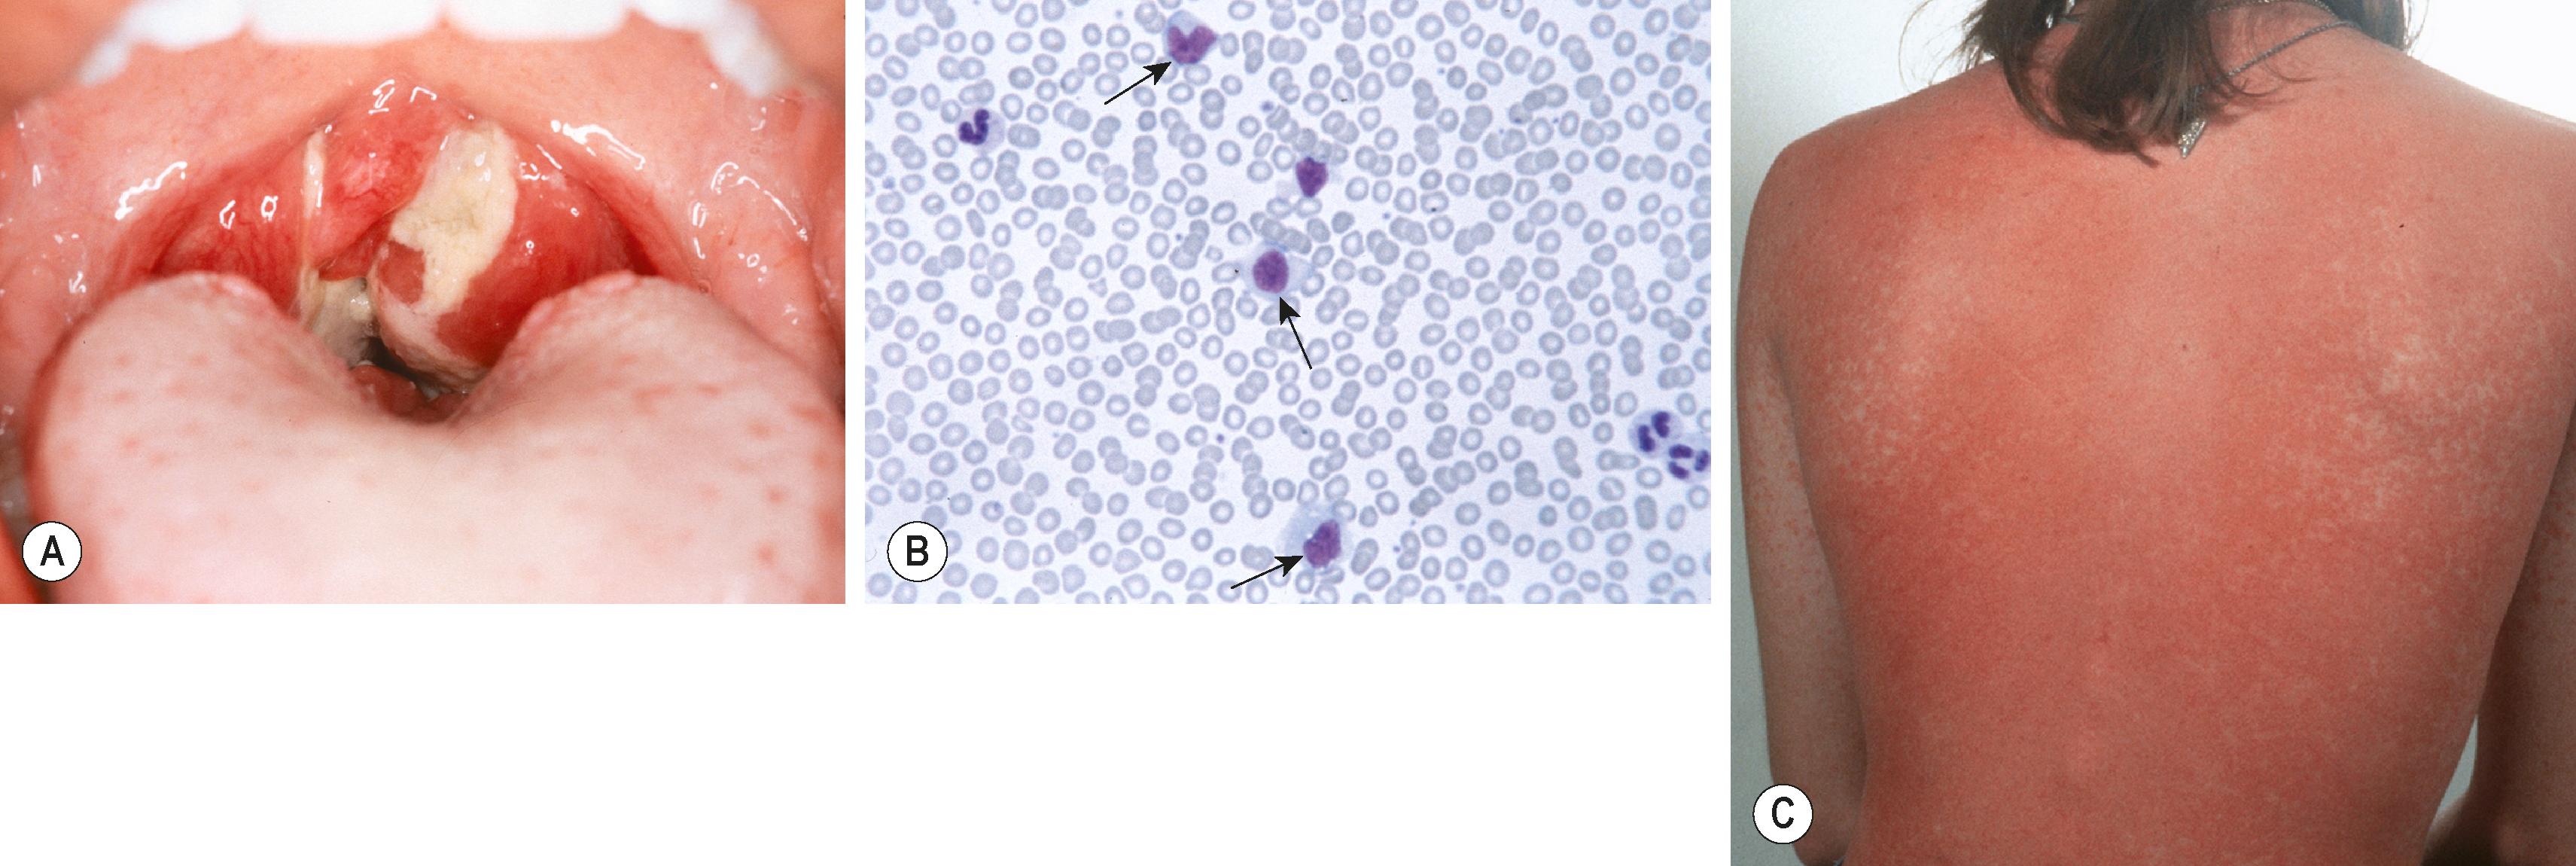 Figure 27.1, (A) Pharyngeal erythema and exudate due to Epstein-Barr virus (EBV) infection. (B) Peripheral blood smear shows atypical lymphocytes (arrows) in a patient with EBV mononucleosis. Notice the abundant cytoplasm with vacuoles and deformation of cell by surrounding cells. (C) Diffuse, erythematous, raised rash on an adolescent with EBV mononucleosis who received amoxicillin. Notice the predominance of exanthem on the trunk and coalescence of lesions.